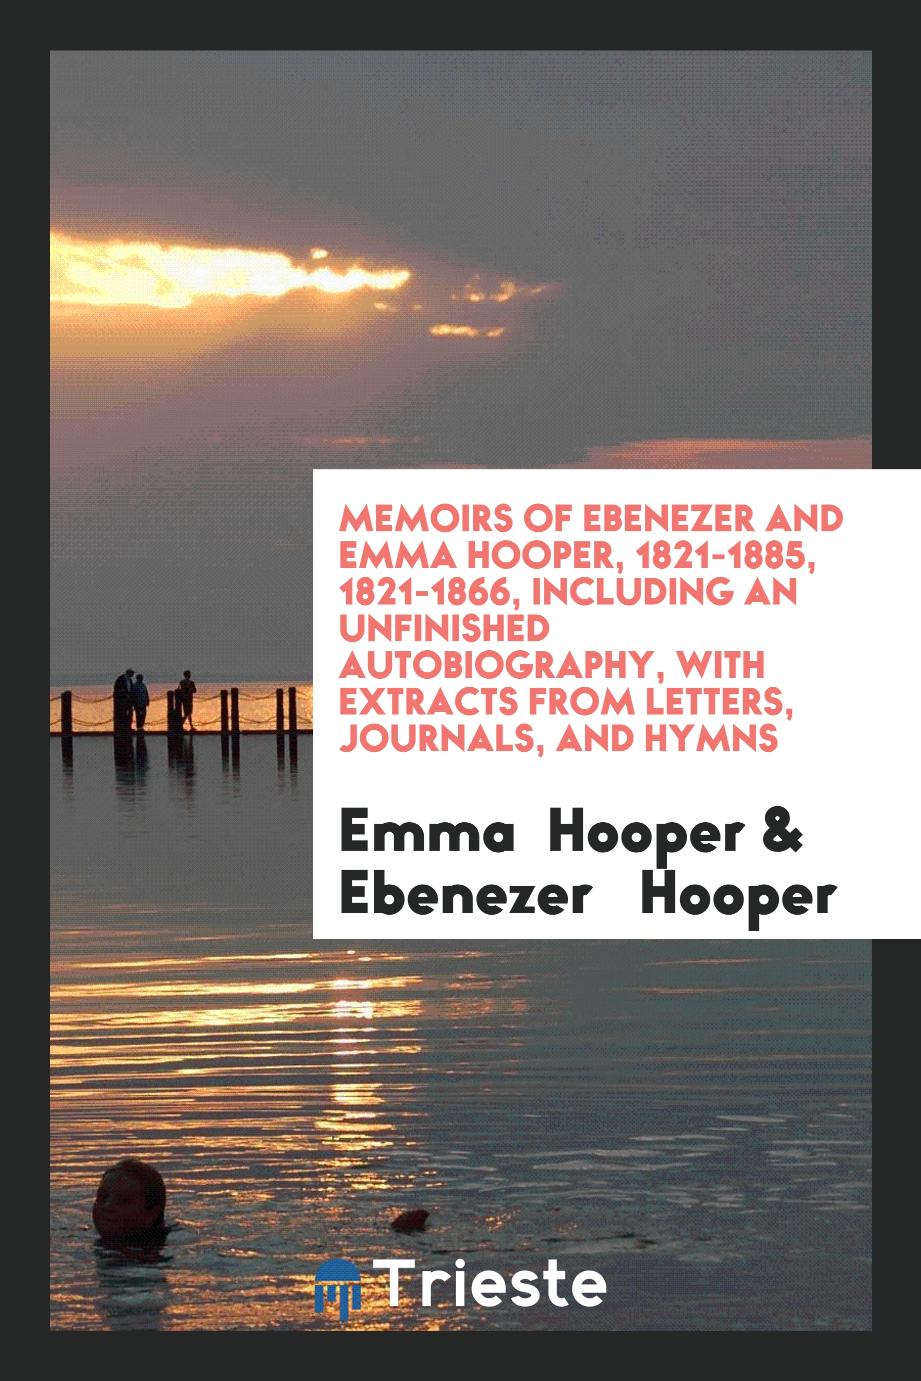 Memoirs of Ebenezer and Emma Hooper, 1821-1885, 1821-1866, Including an Unfinished Autobiography, with Extracts from Letters, Journals, and Hymns